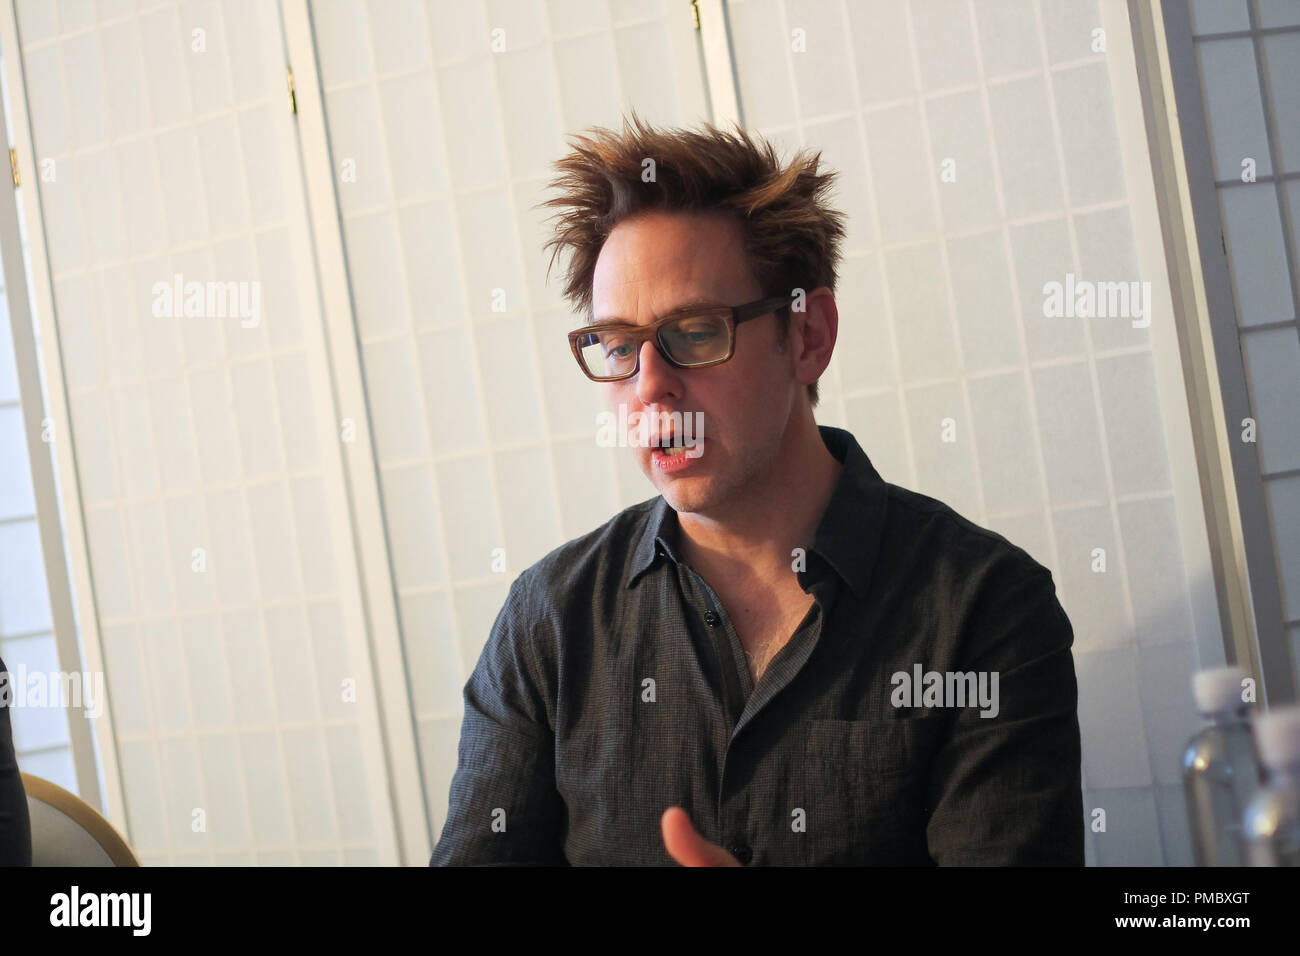 Director James Gunn at 'Guardians of the Galaxy Vol. 2' Press Conference held on April 20, 2017 at the London Hotel in West Hollywood,  California. No Tabloids. No USA sales for 30 days of origination.  File Reference # 33297 017JRC  For Editorial Use Only -  All Rights Reserved Stock Photo